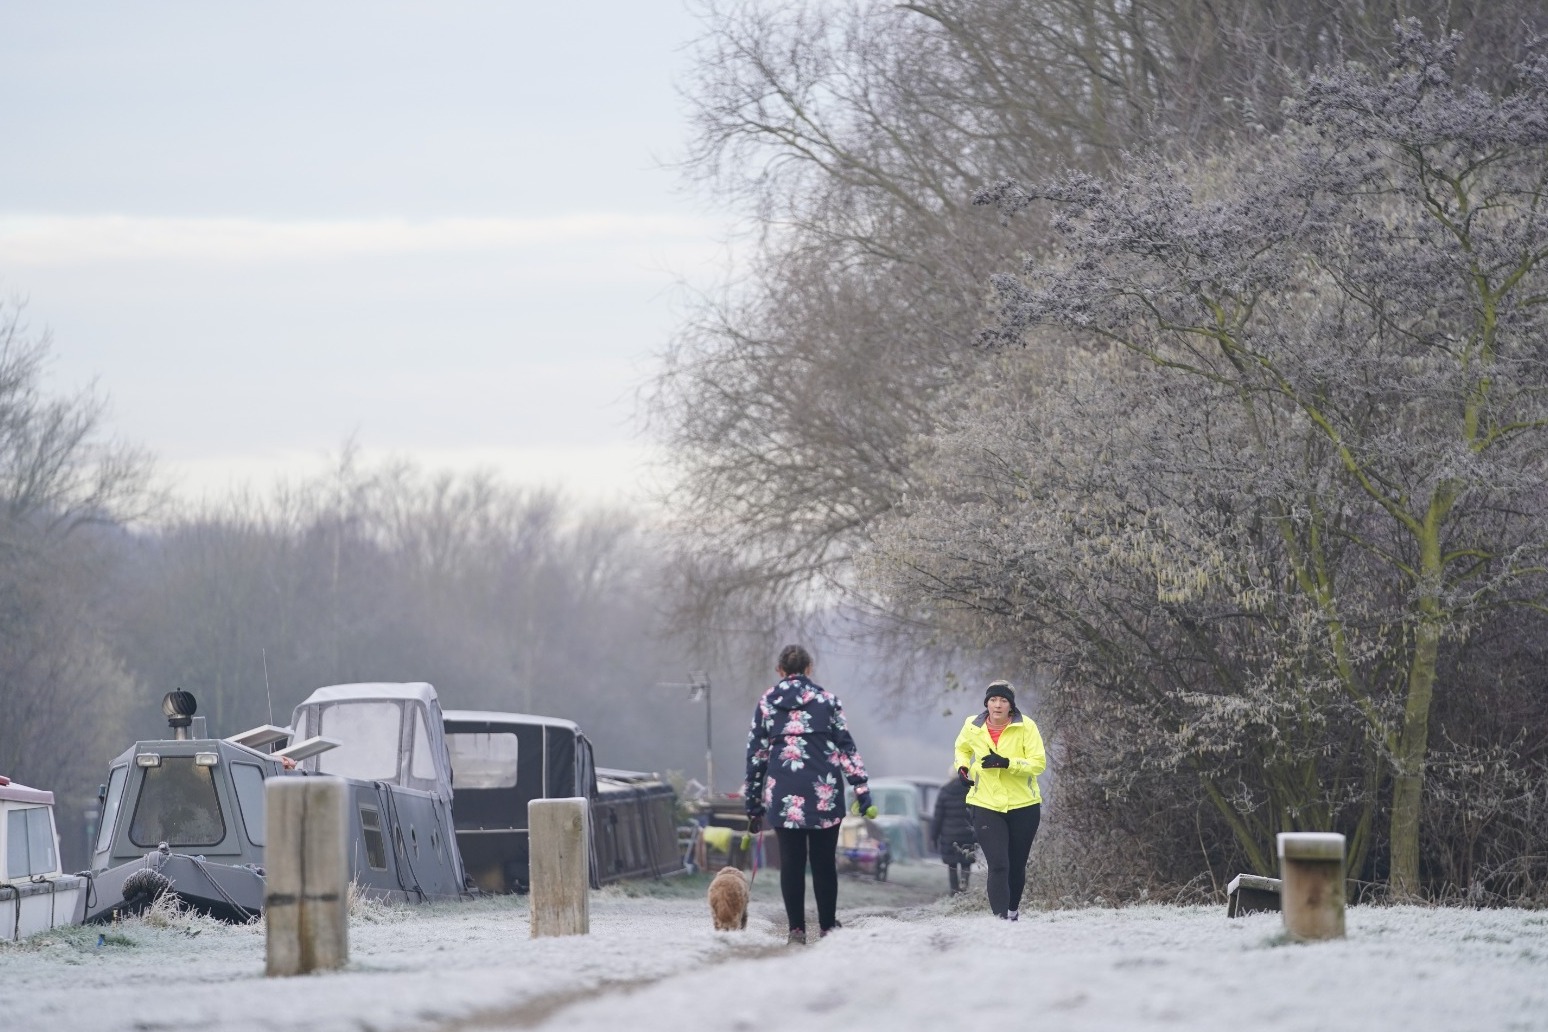 Cold weather alert issued as temperatures set to plummet across parts of UK 